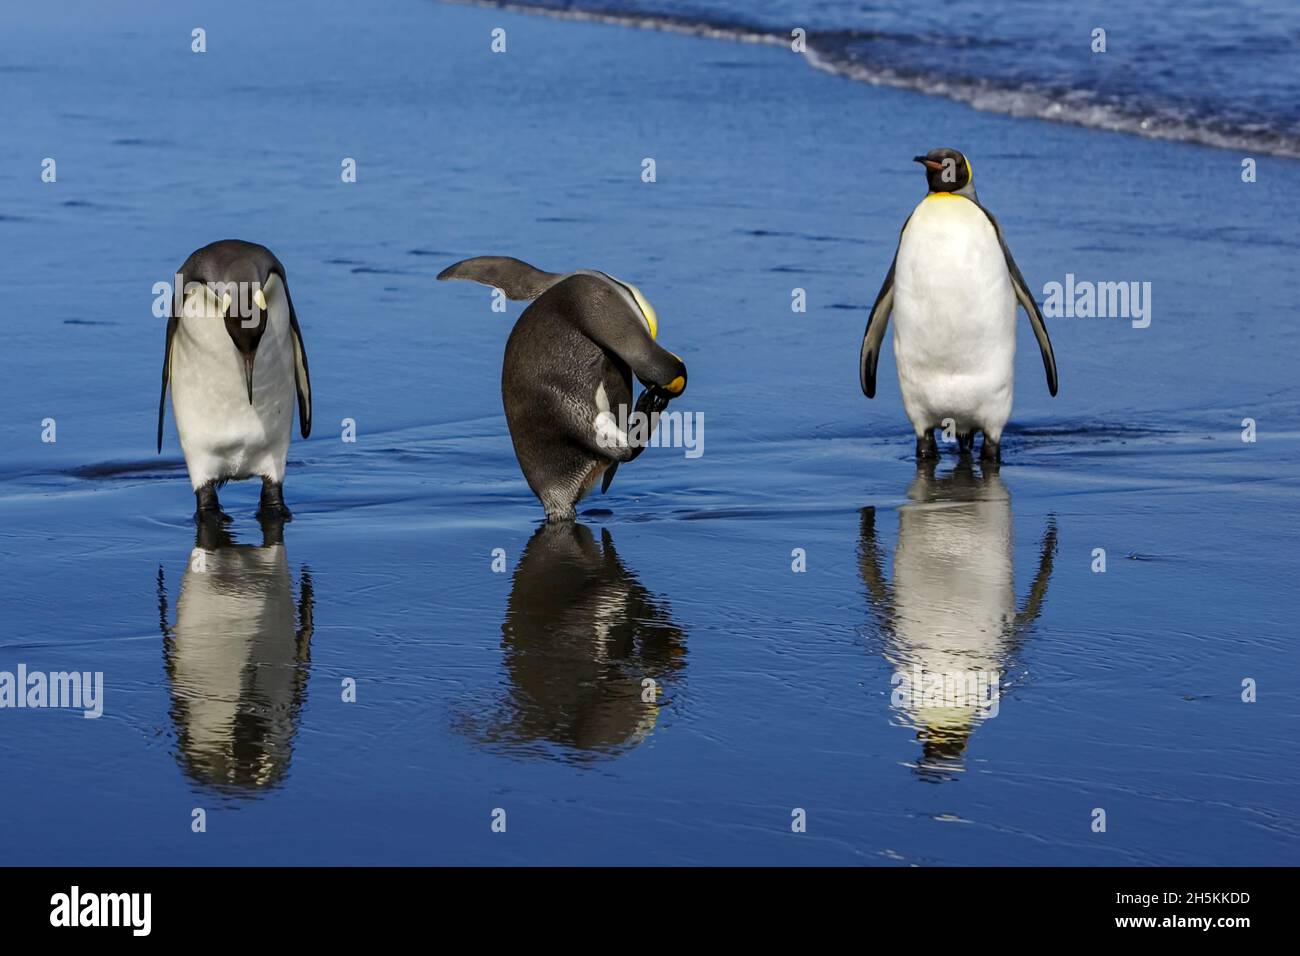 King penguins, Aptenodytes patagonica, and reflections at water's edge Stock Photo